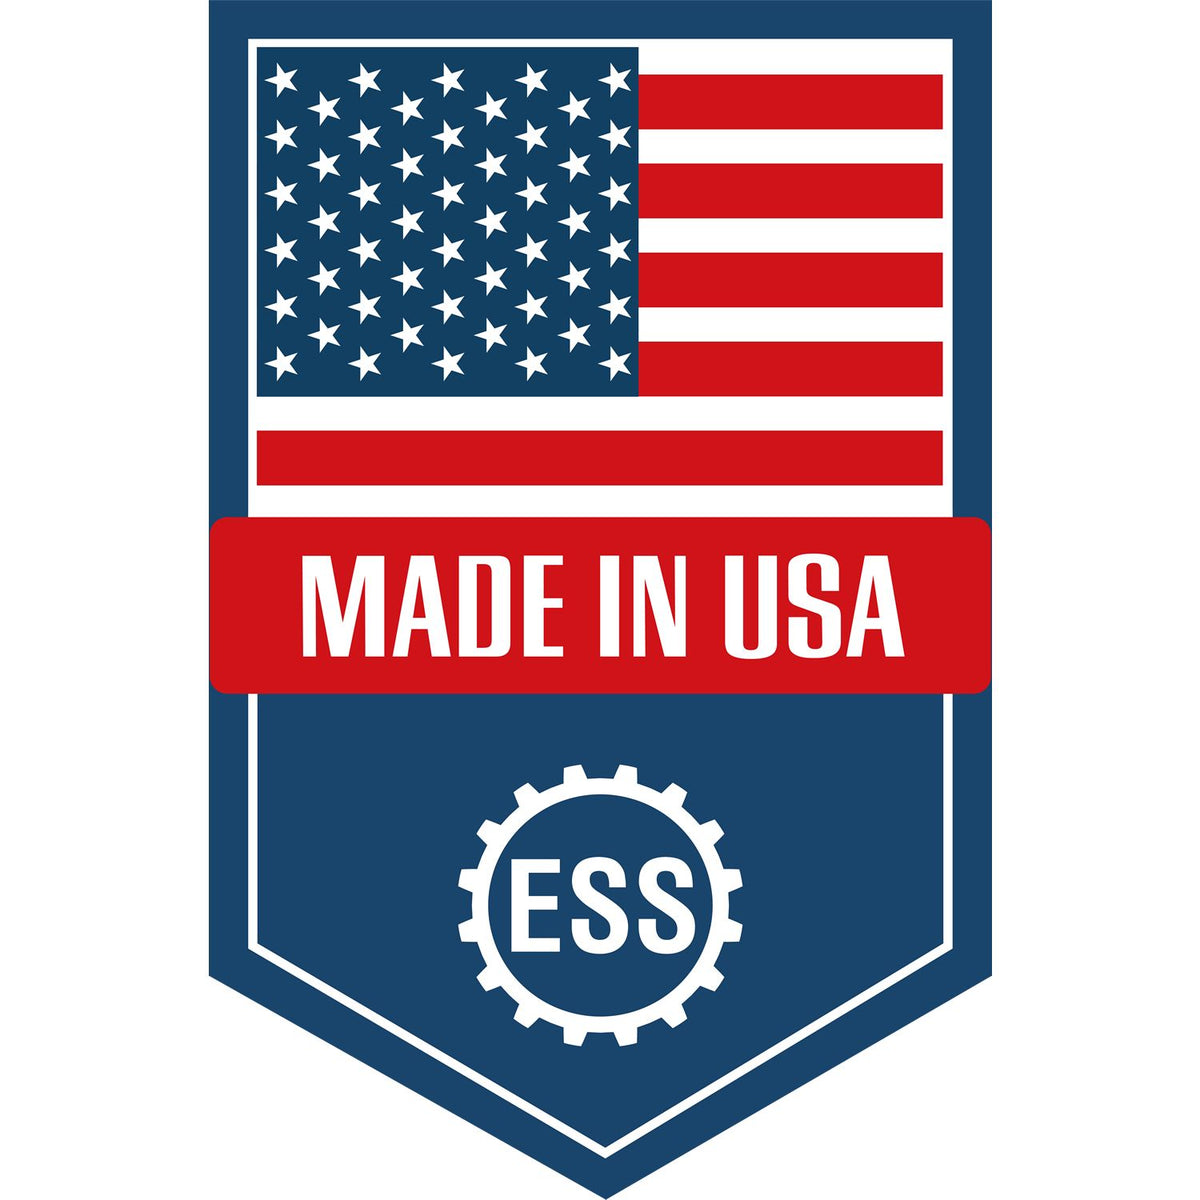 An icon or graphic with an american flag and text reading Made in USA for the Self-Inking South Carolina Landscape Architect Stamp